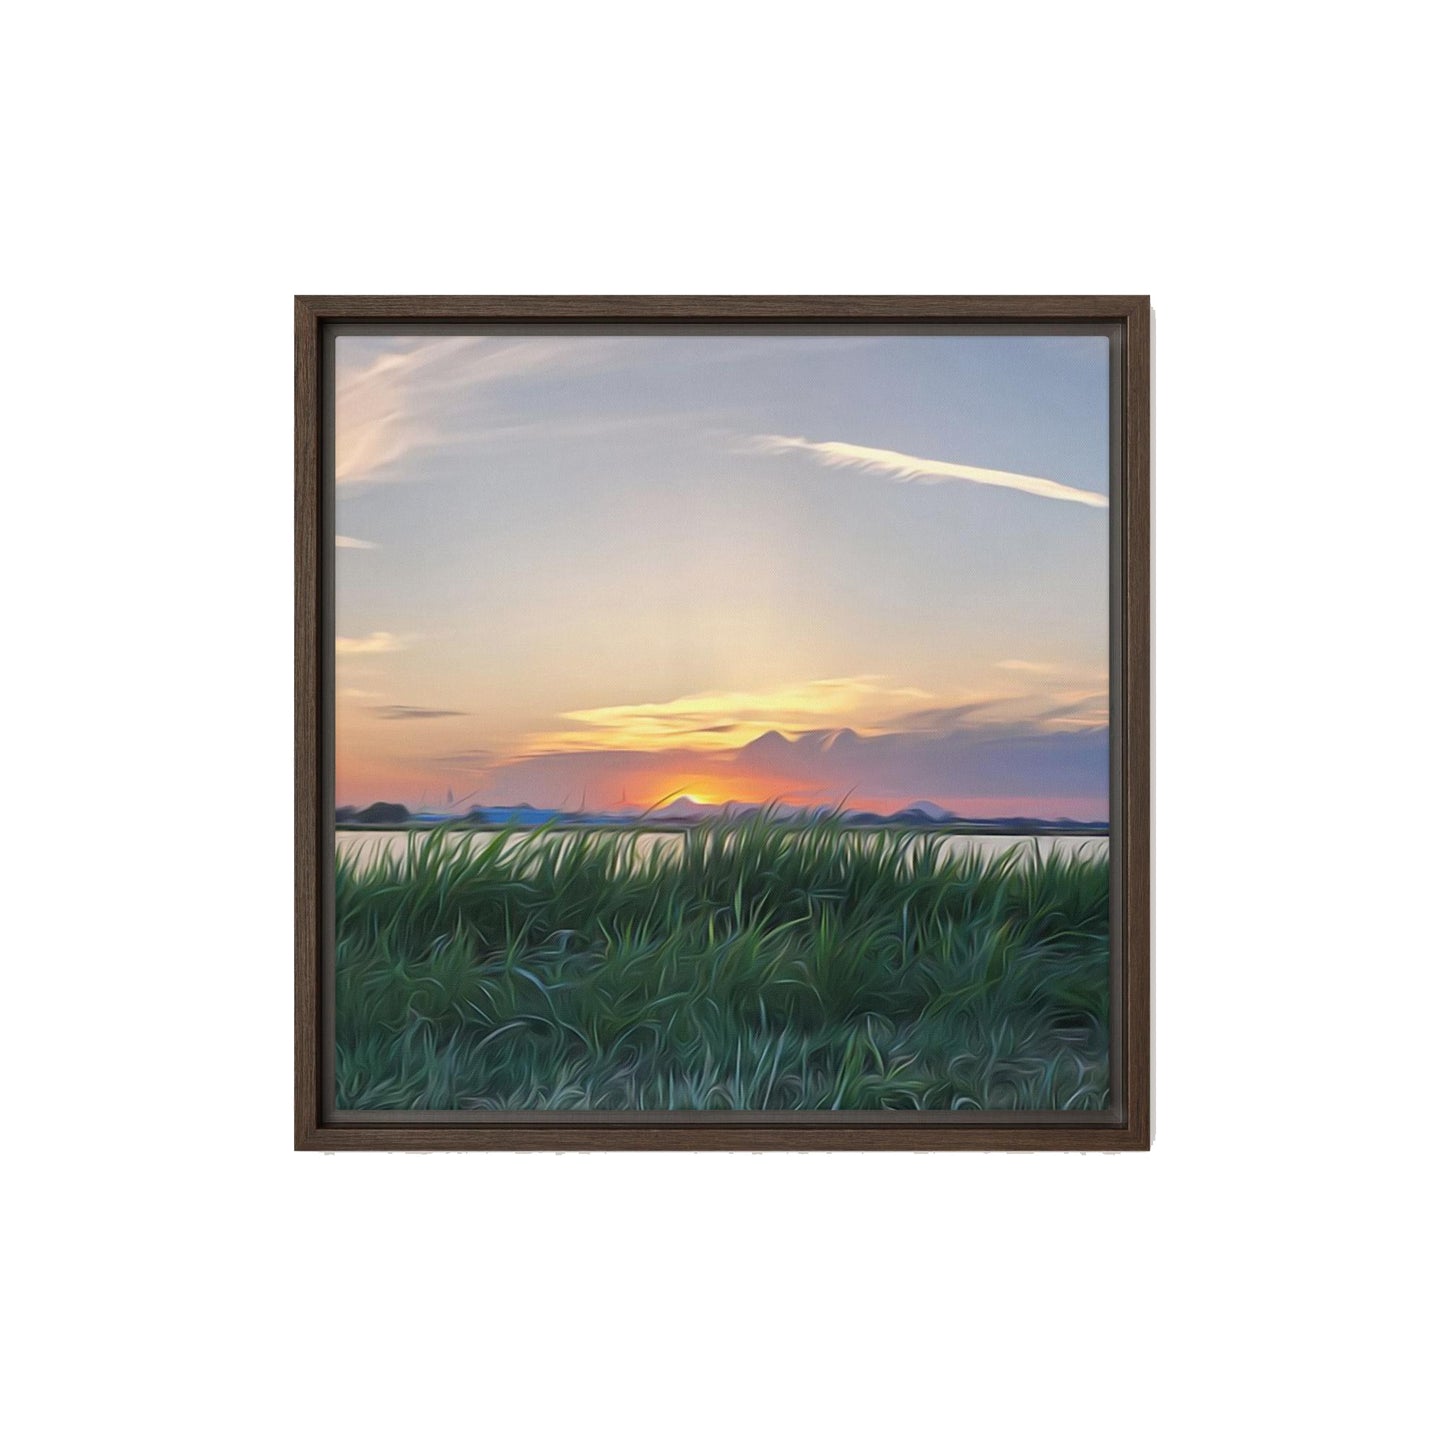 Laying in The Grass Framed Print